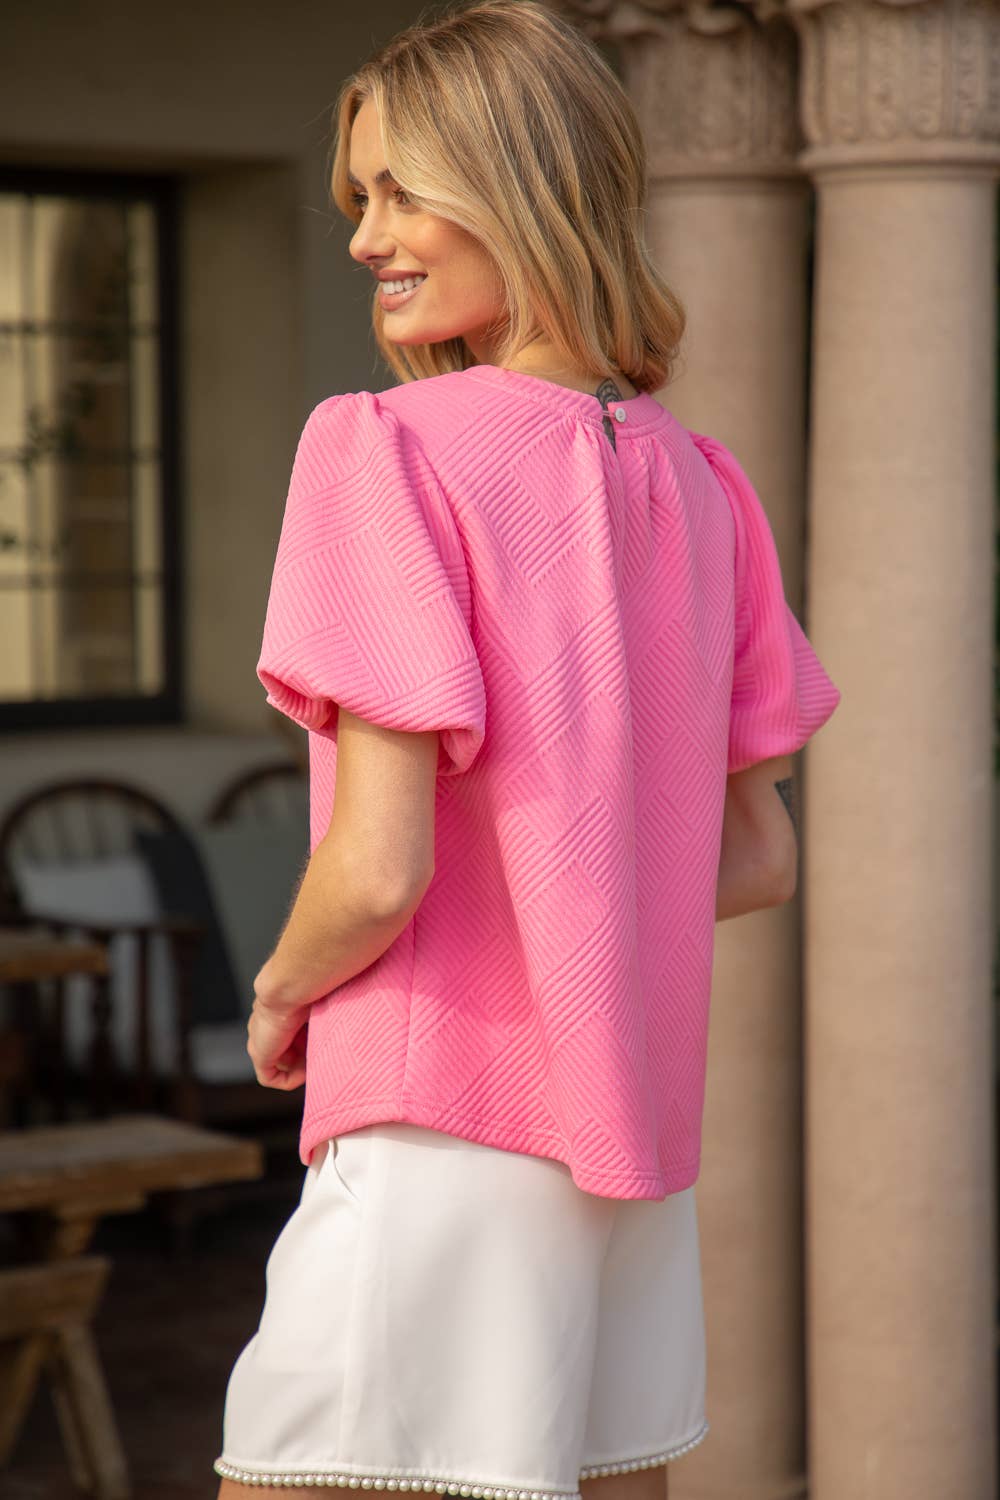 Pink Bubble Short Sleeve Textured Knit Top